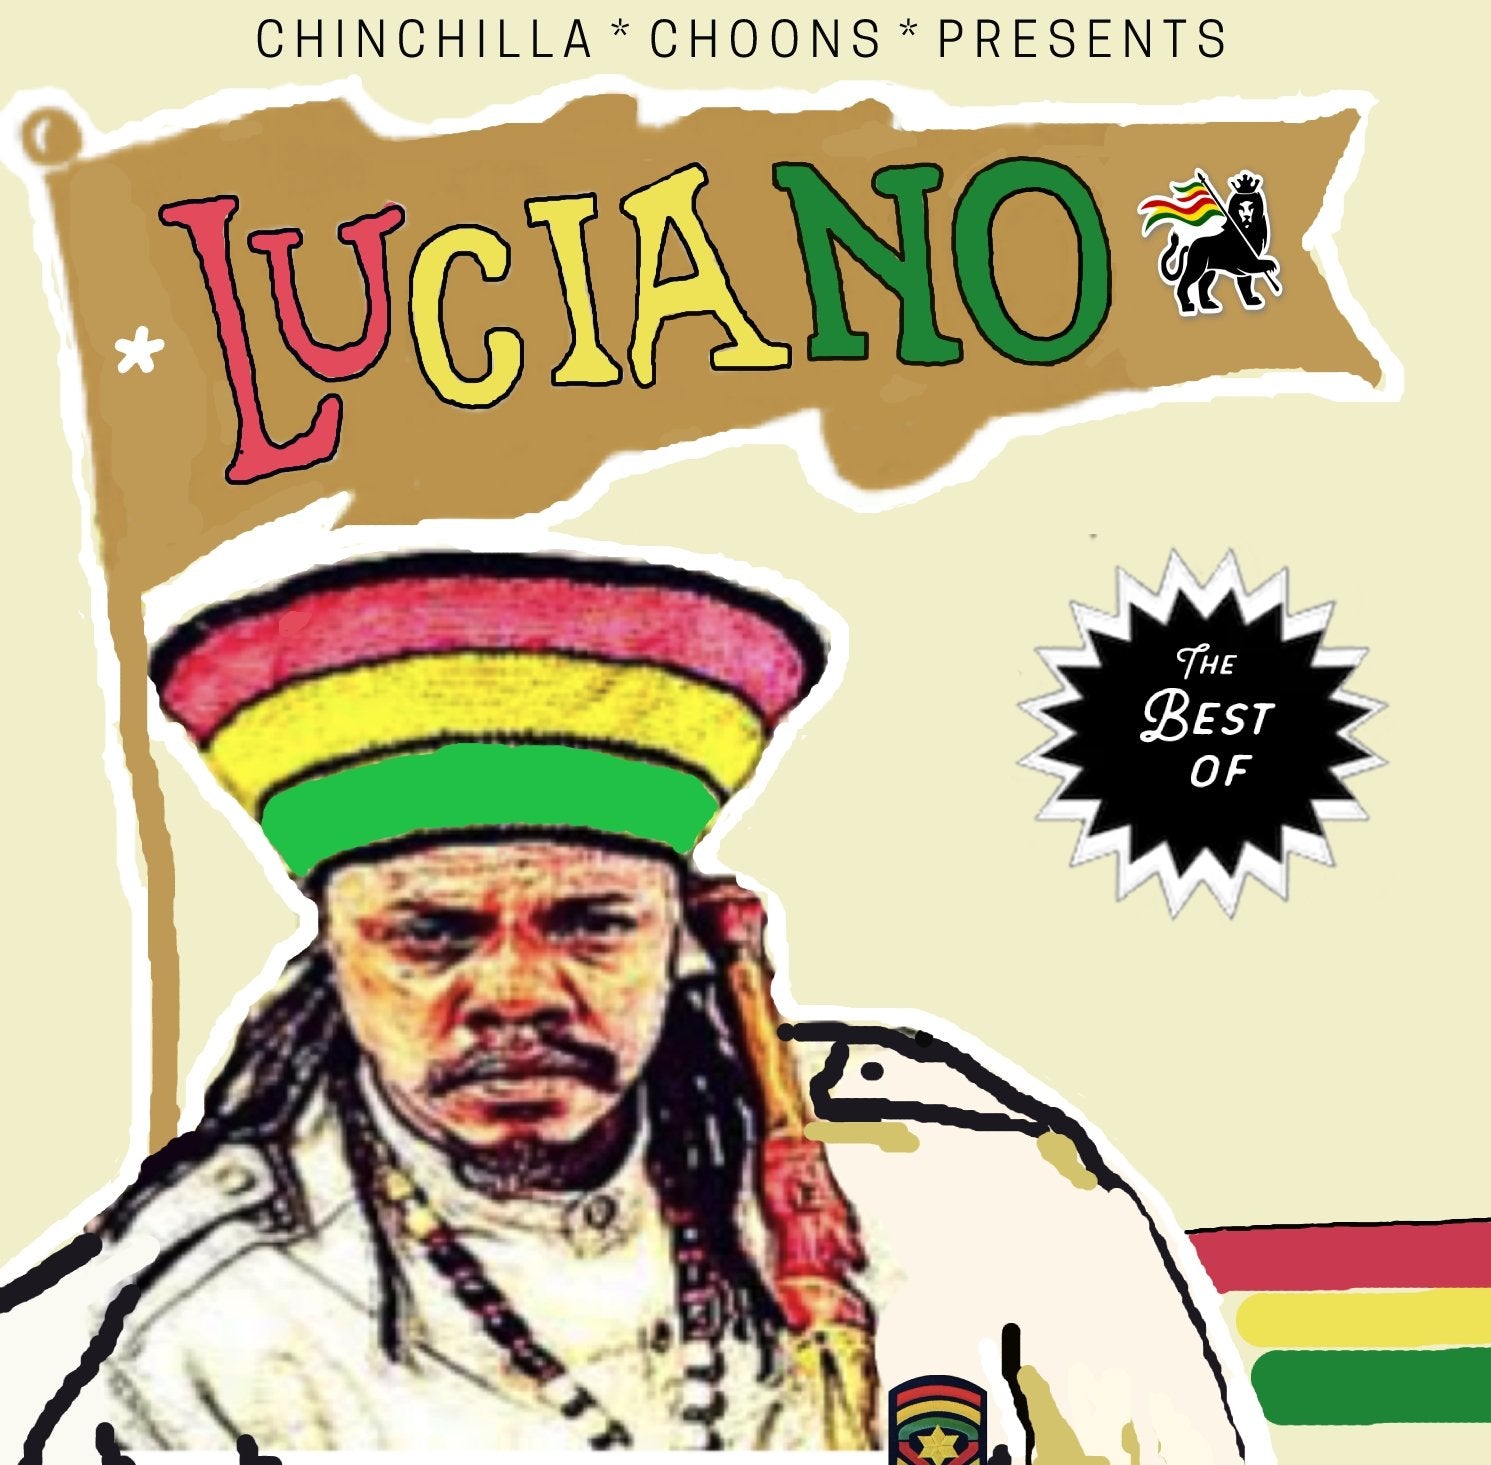 Luciano - The Best Of (DOWNLOAD) - Chinchilla Choons